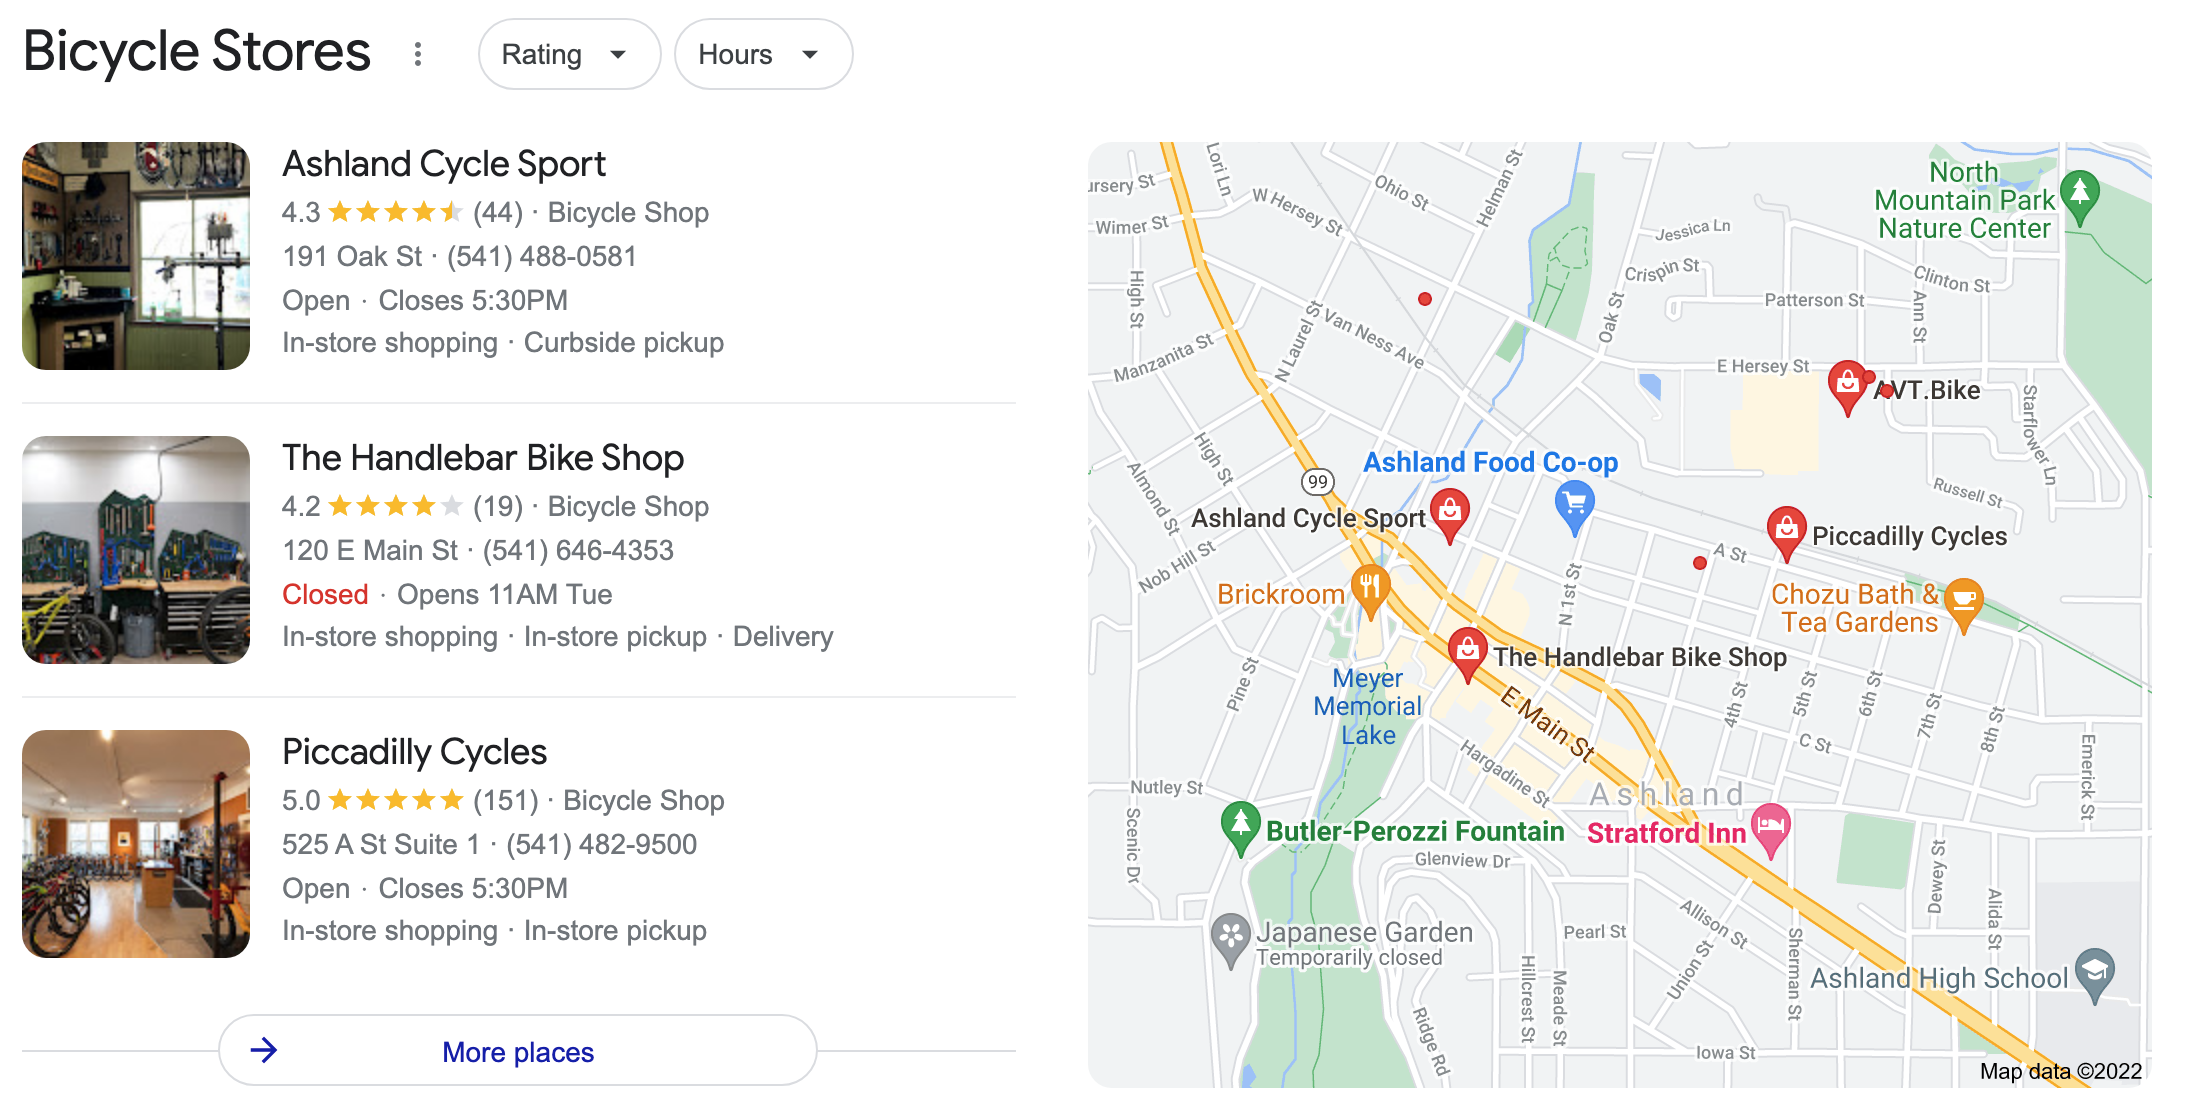 Location Pages are an SEO Goldmine